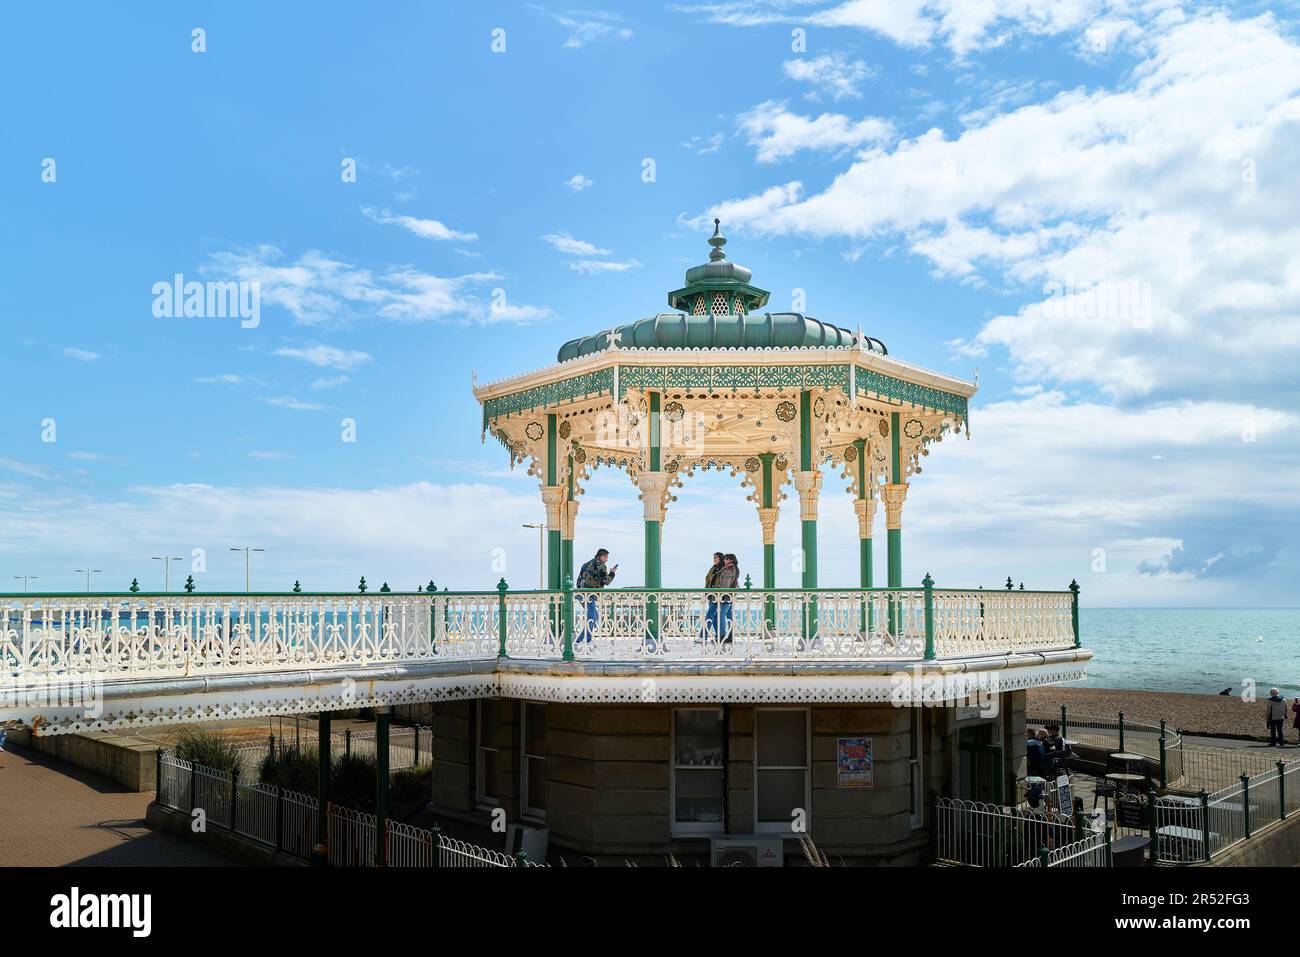 Visitors on the bandstand (known as the birdcage) at the promenade at Brighton and Hove, south coast of England. Stock Photo